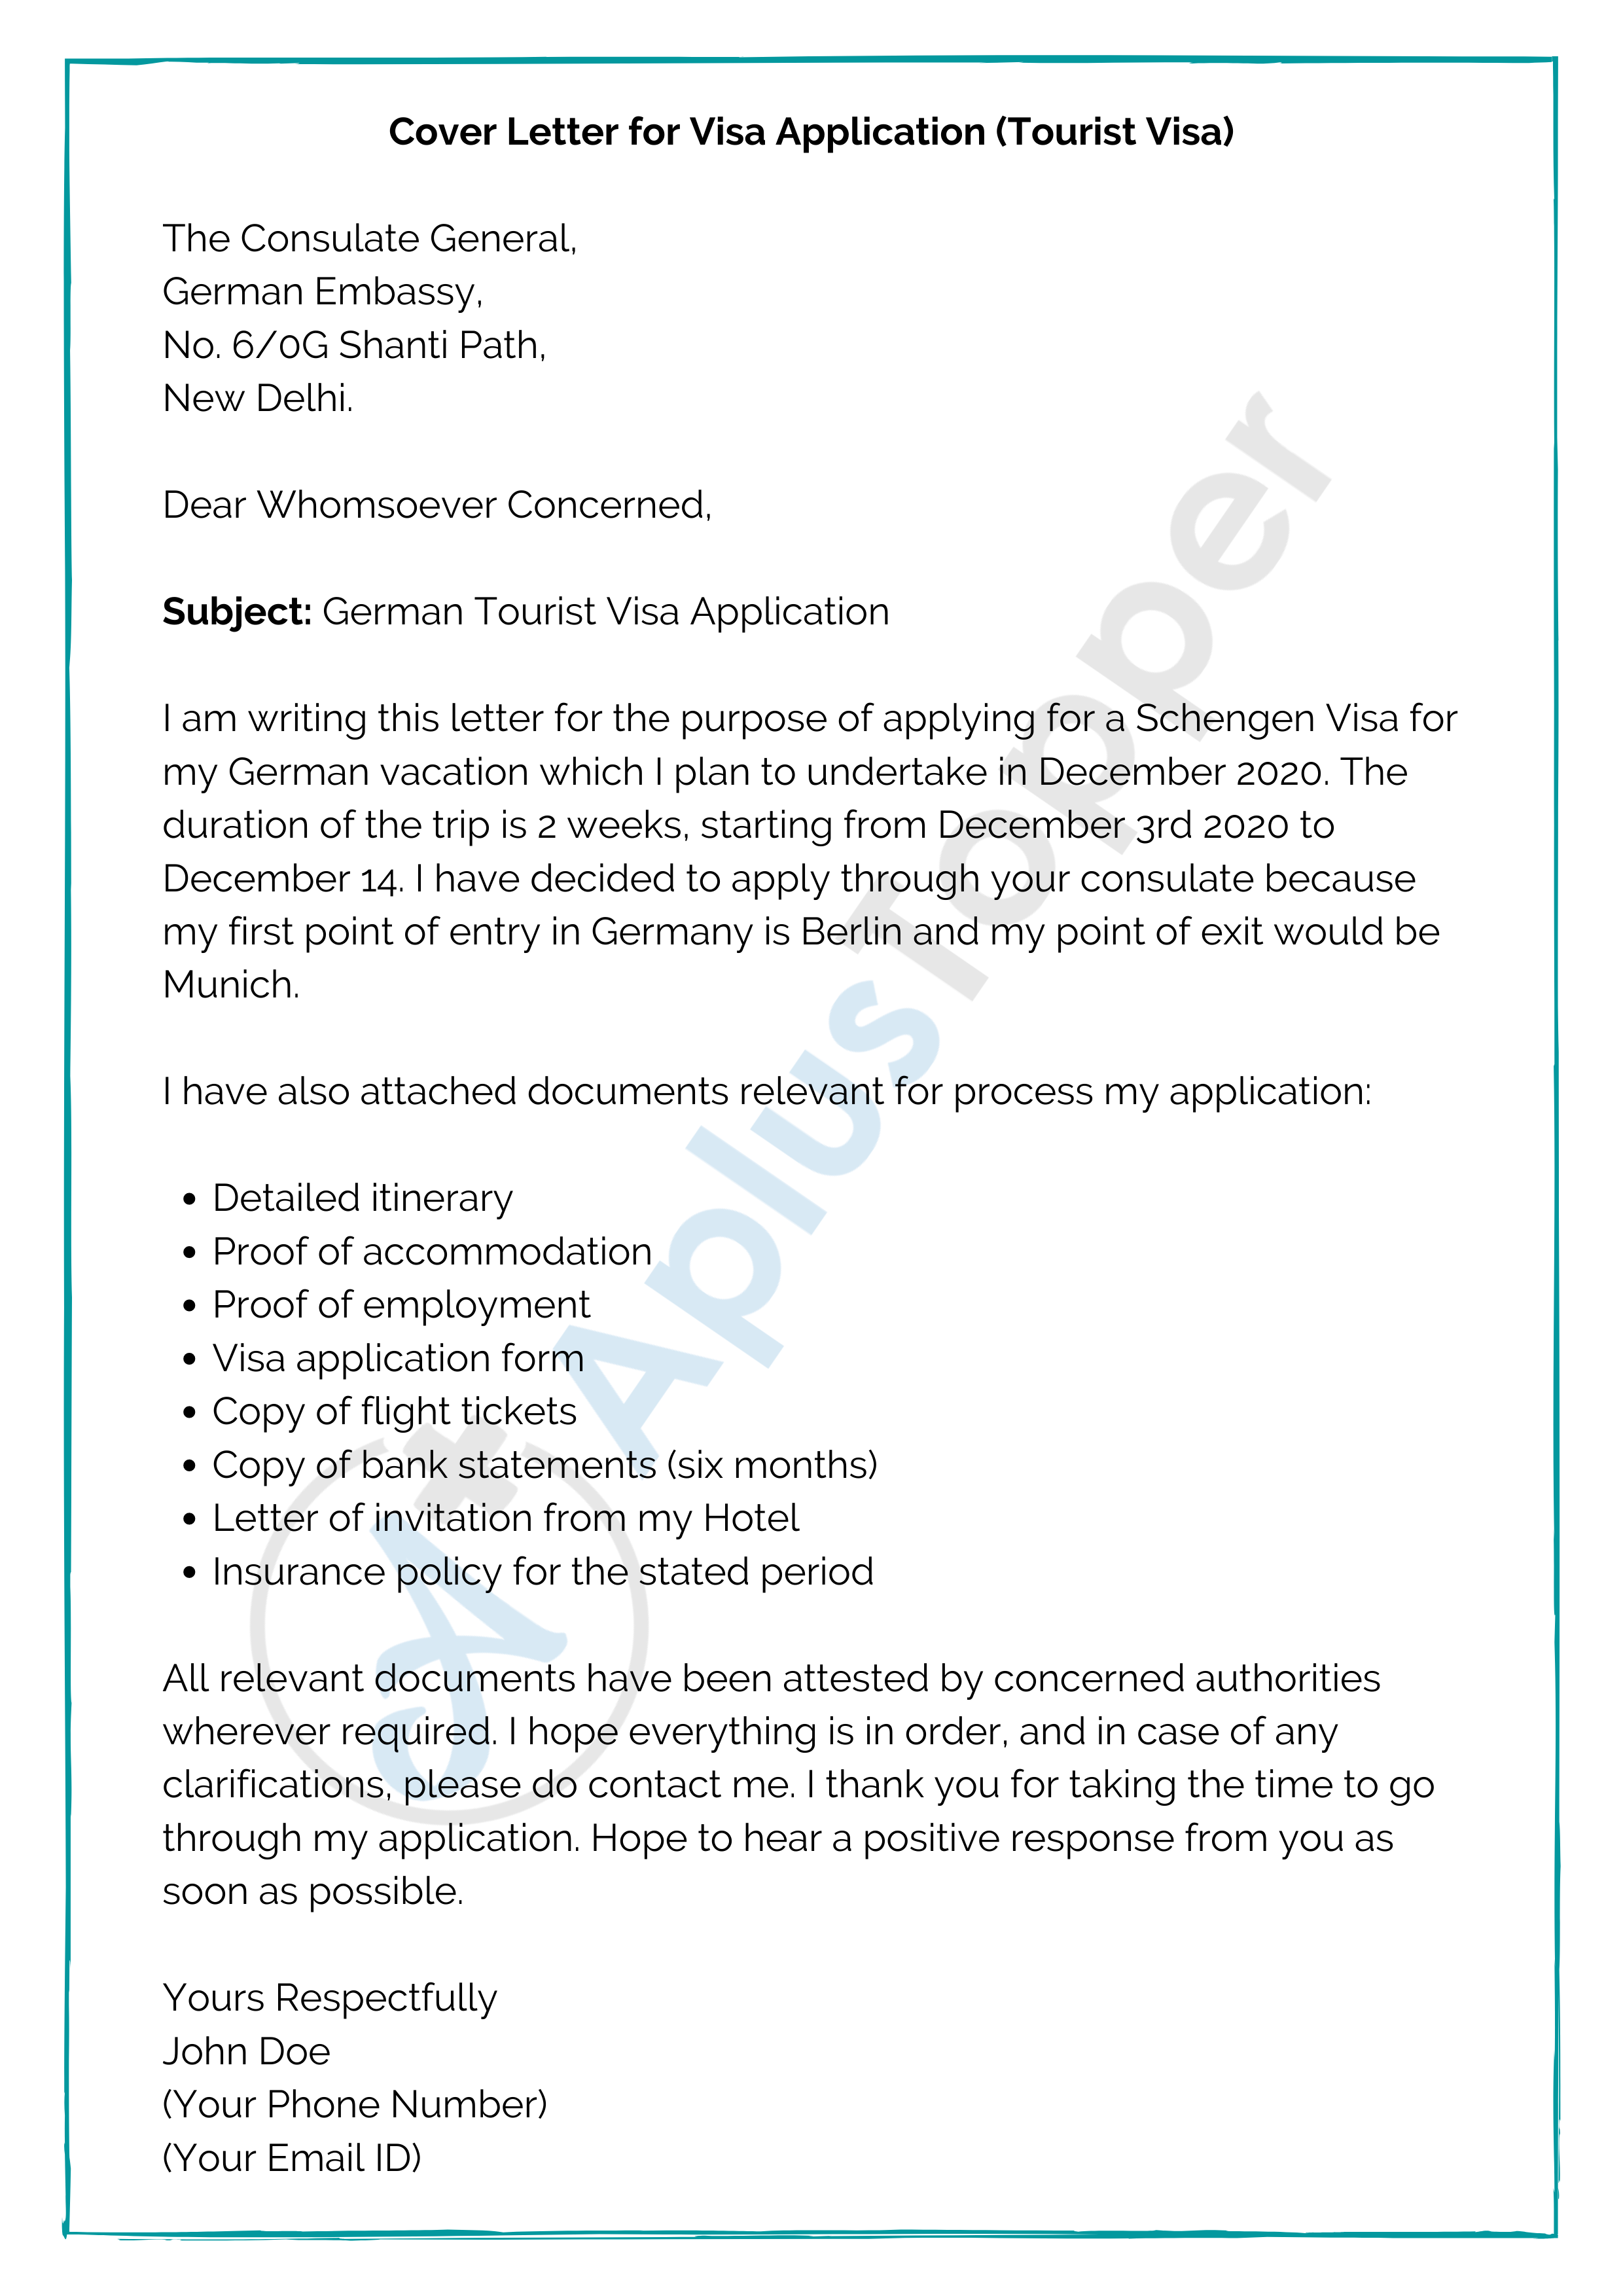 Cover Letter | How To Write Cover Letter?, Samples, Templates, Examples